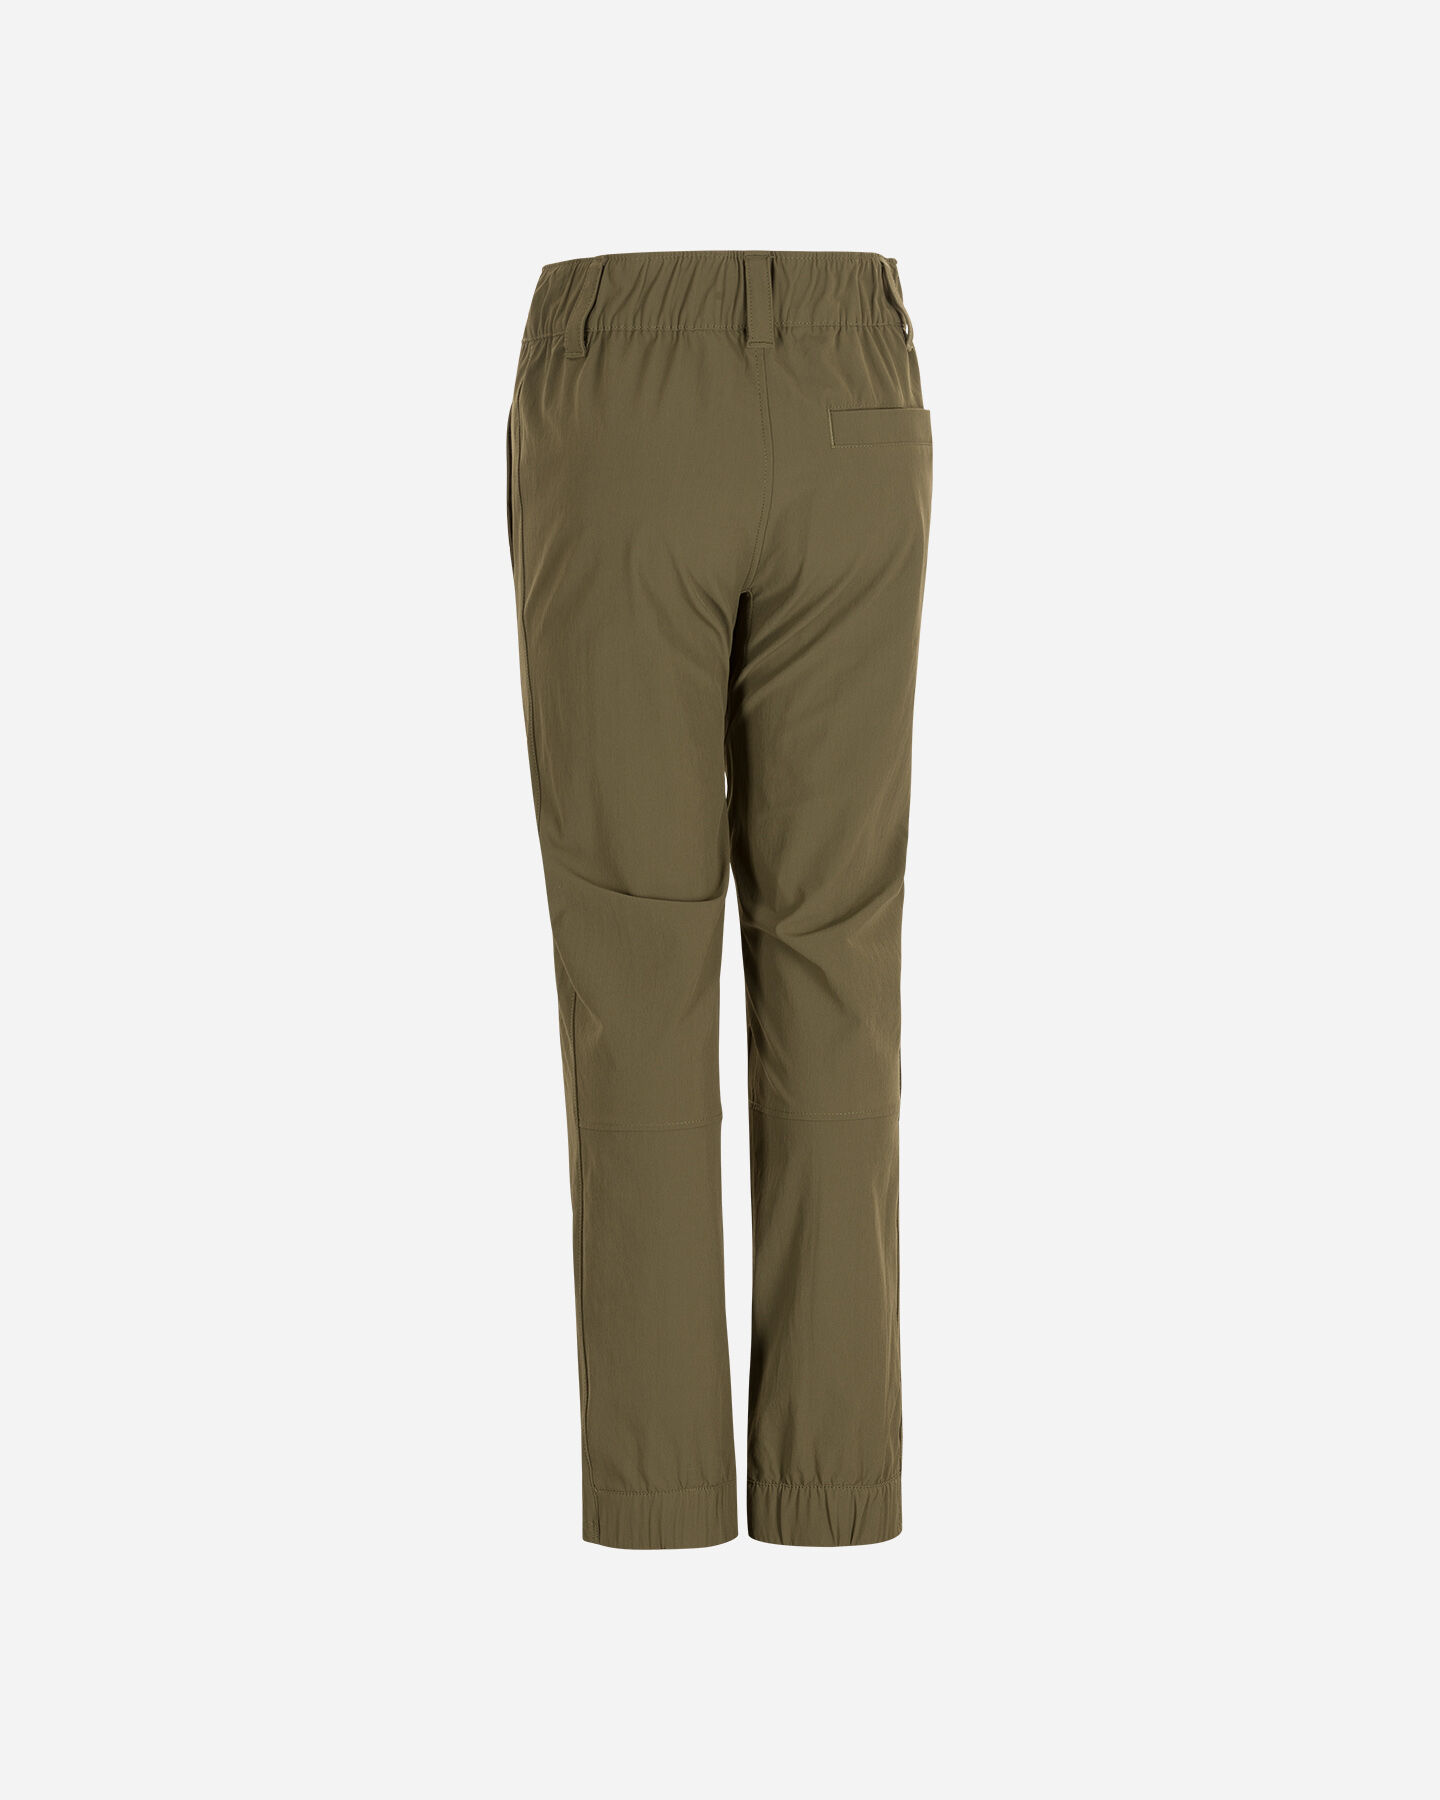  Pantalone outdoor THE NORTH FACE EXPLORATION BURNT OLIVE GREE JR S5409406|7D6|REGS scatto 1